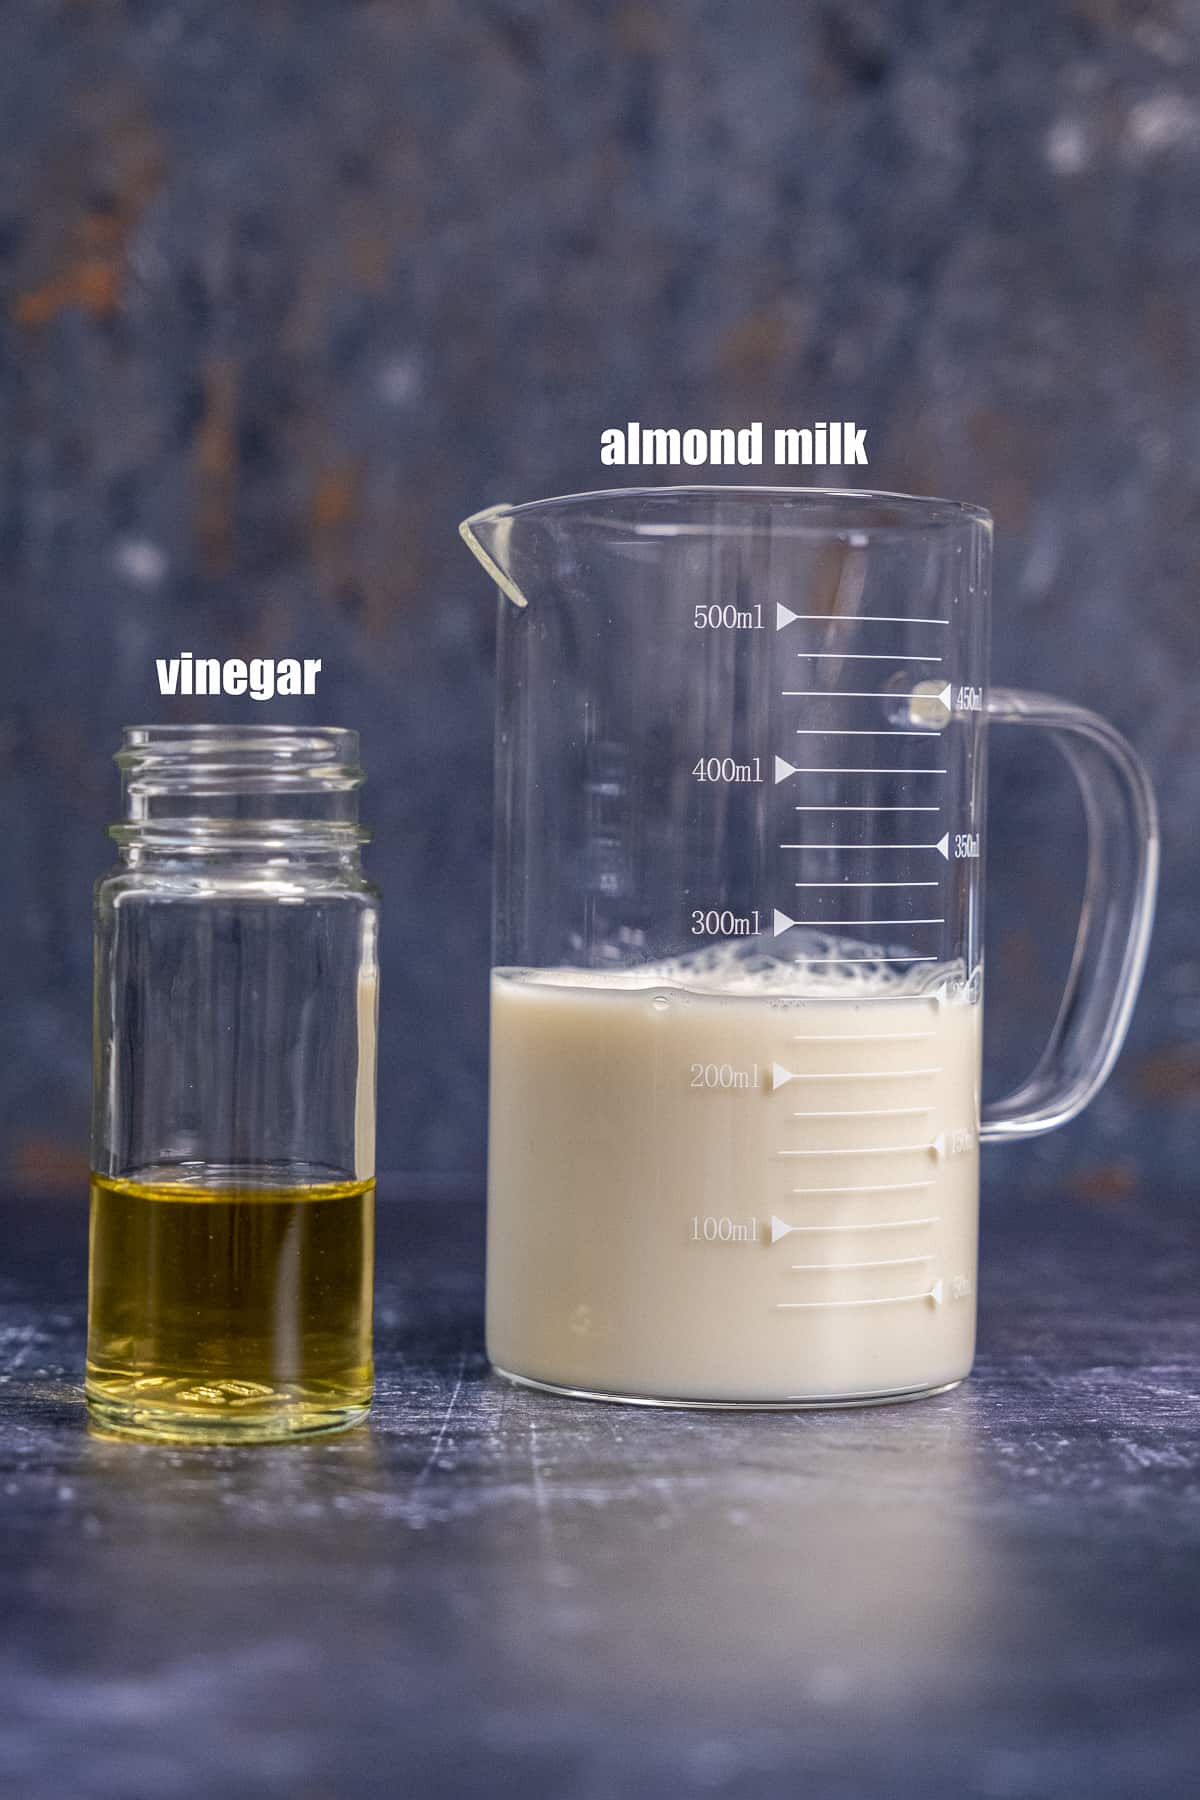 Almond milk in a glass measuring cup and apple cider vinegar in a small jar on a dark background.